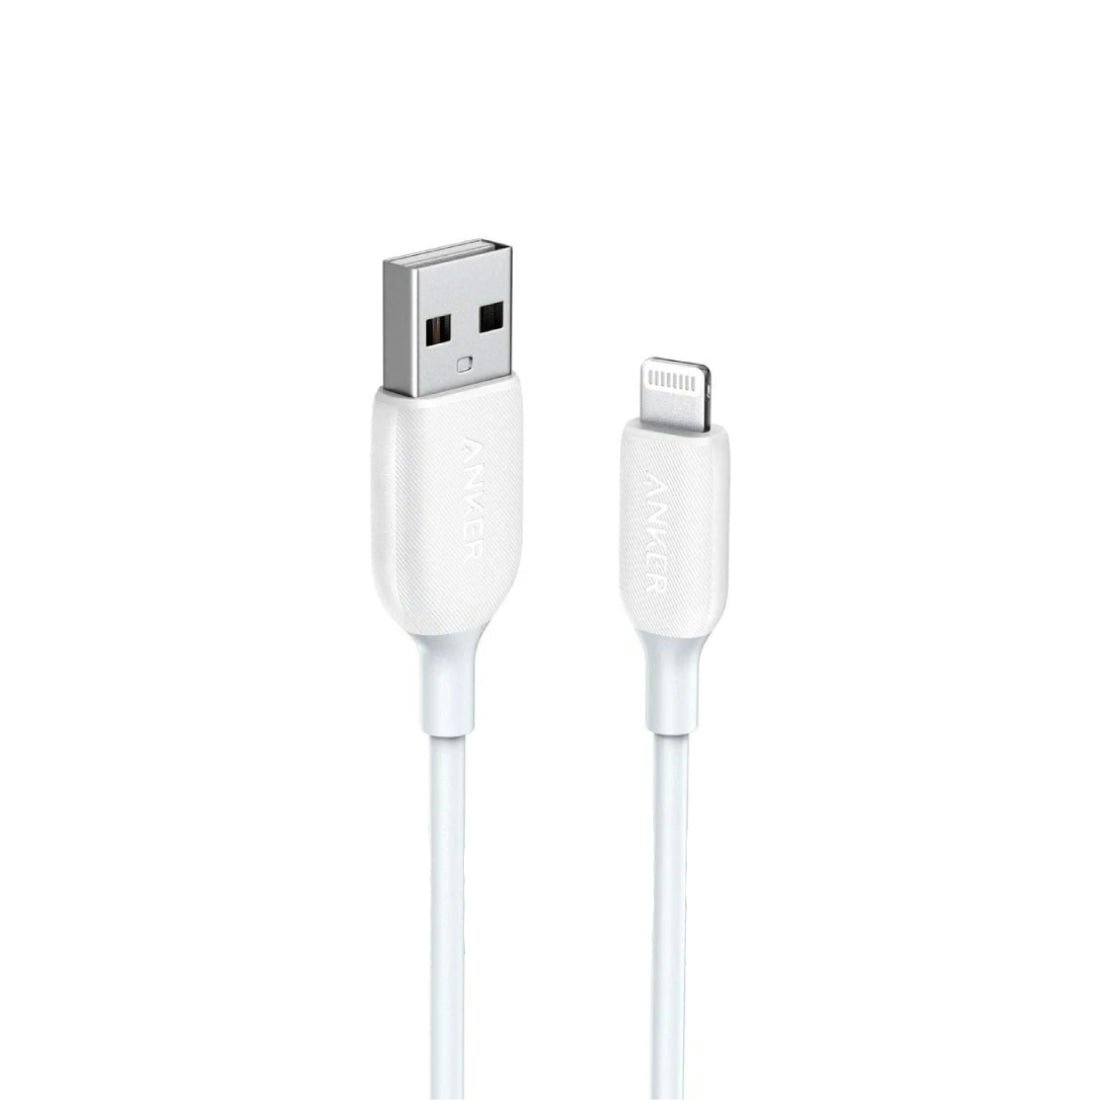 Anker PowerLine III 6ft USB-A Cable with Lightning Connector - White - كابل - Store 974 | ستور ٩٧٤